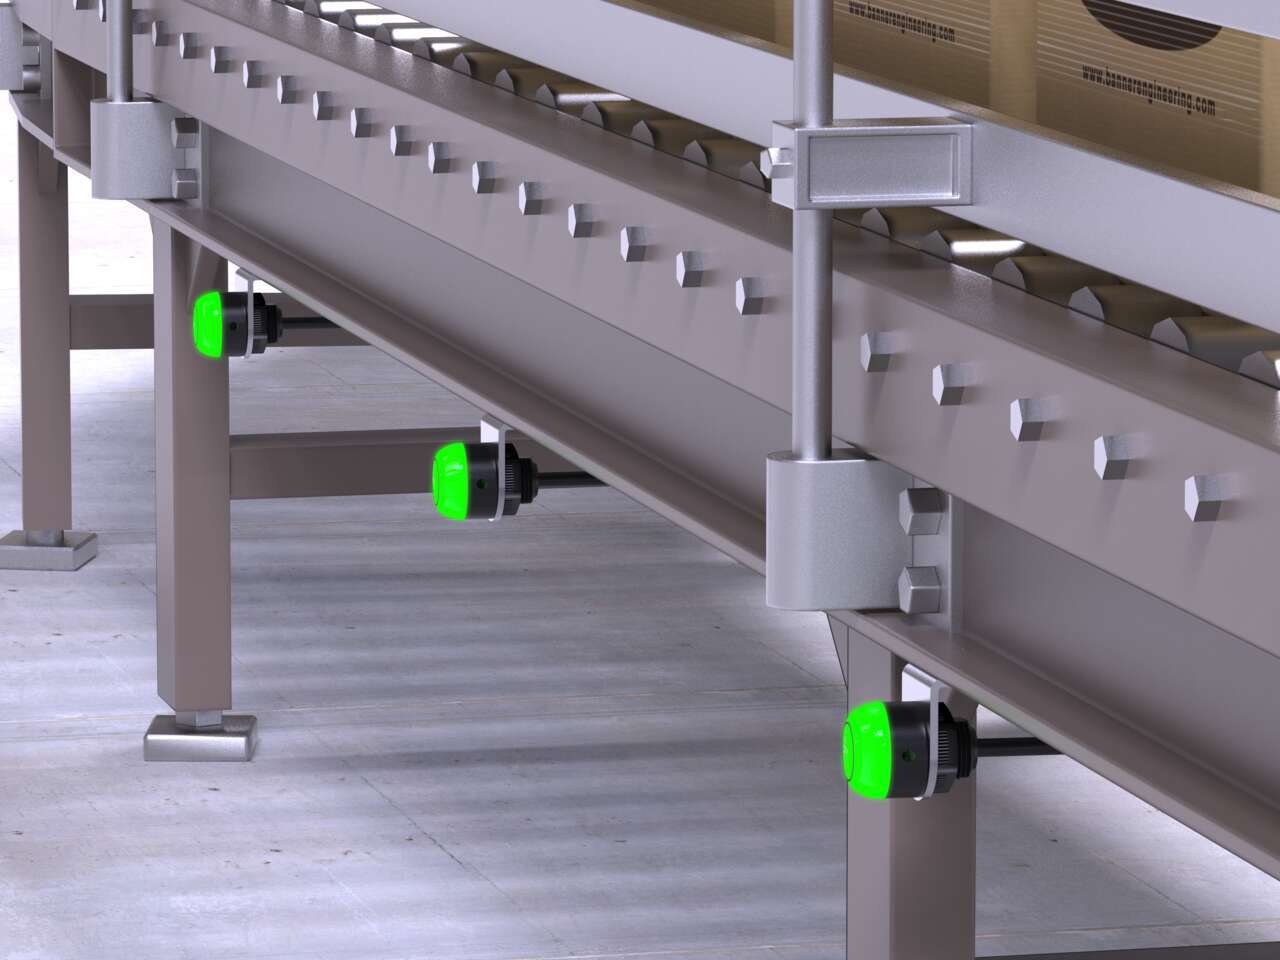 Operator Indication on Conveyor Systems